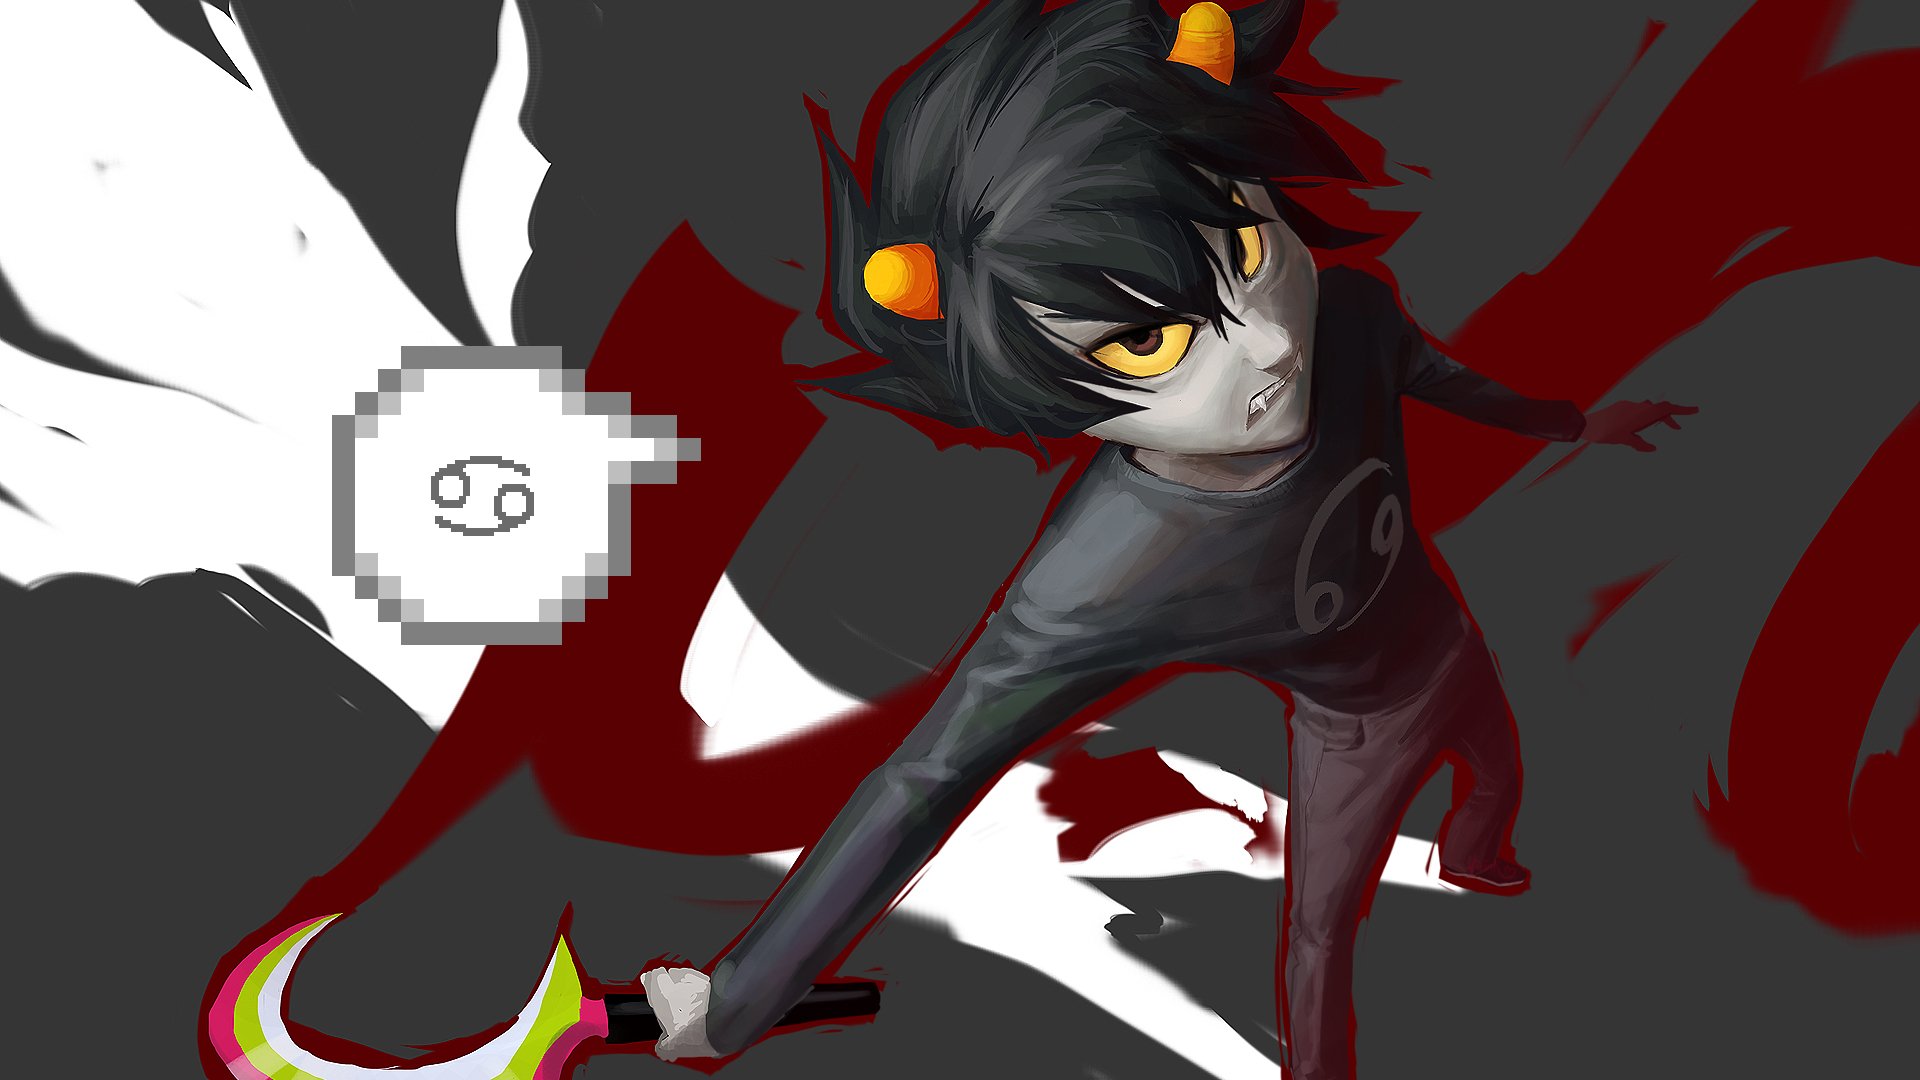 Homestuck Full HD Wallpaper and Background Image | 1920x1080 | ID:221972